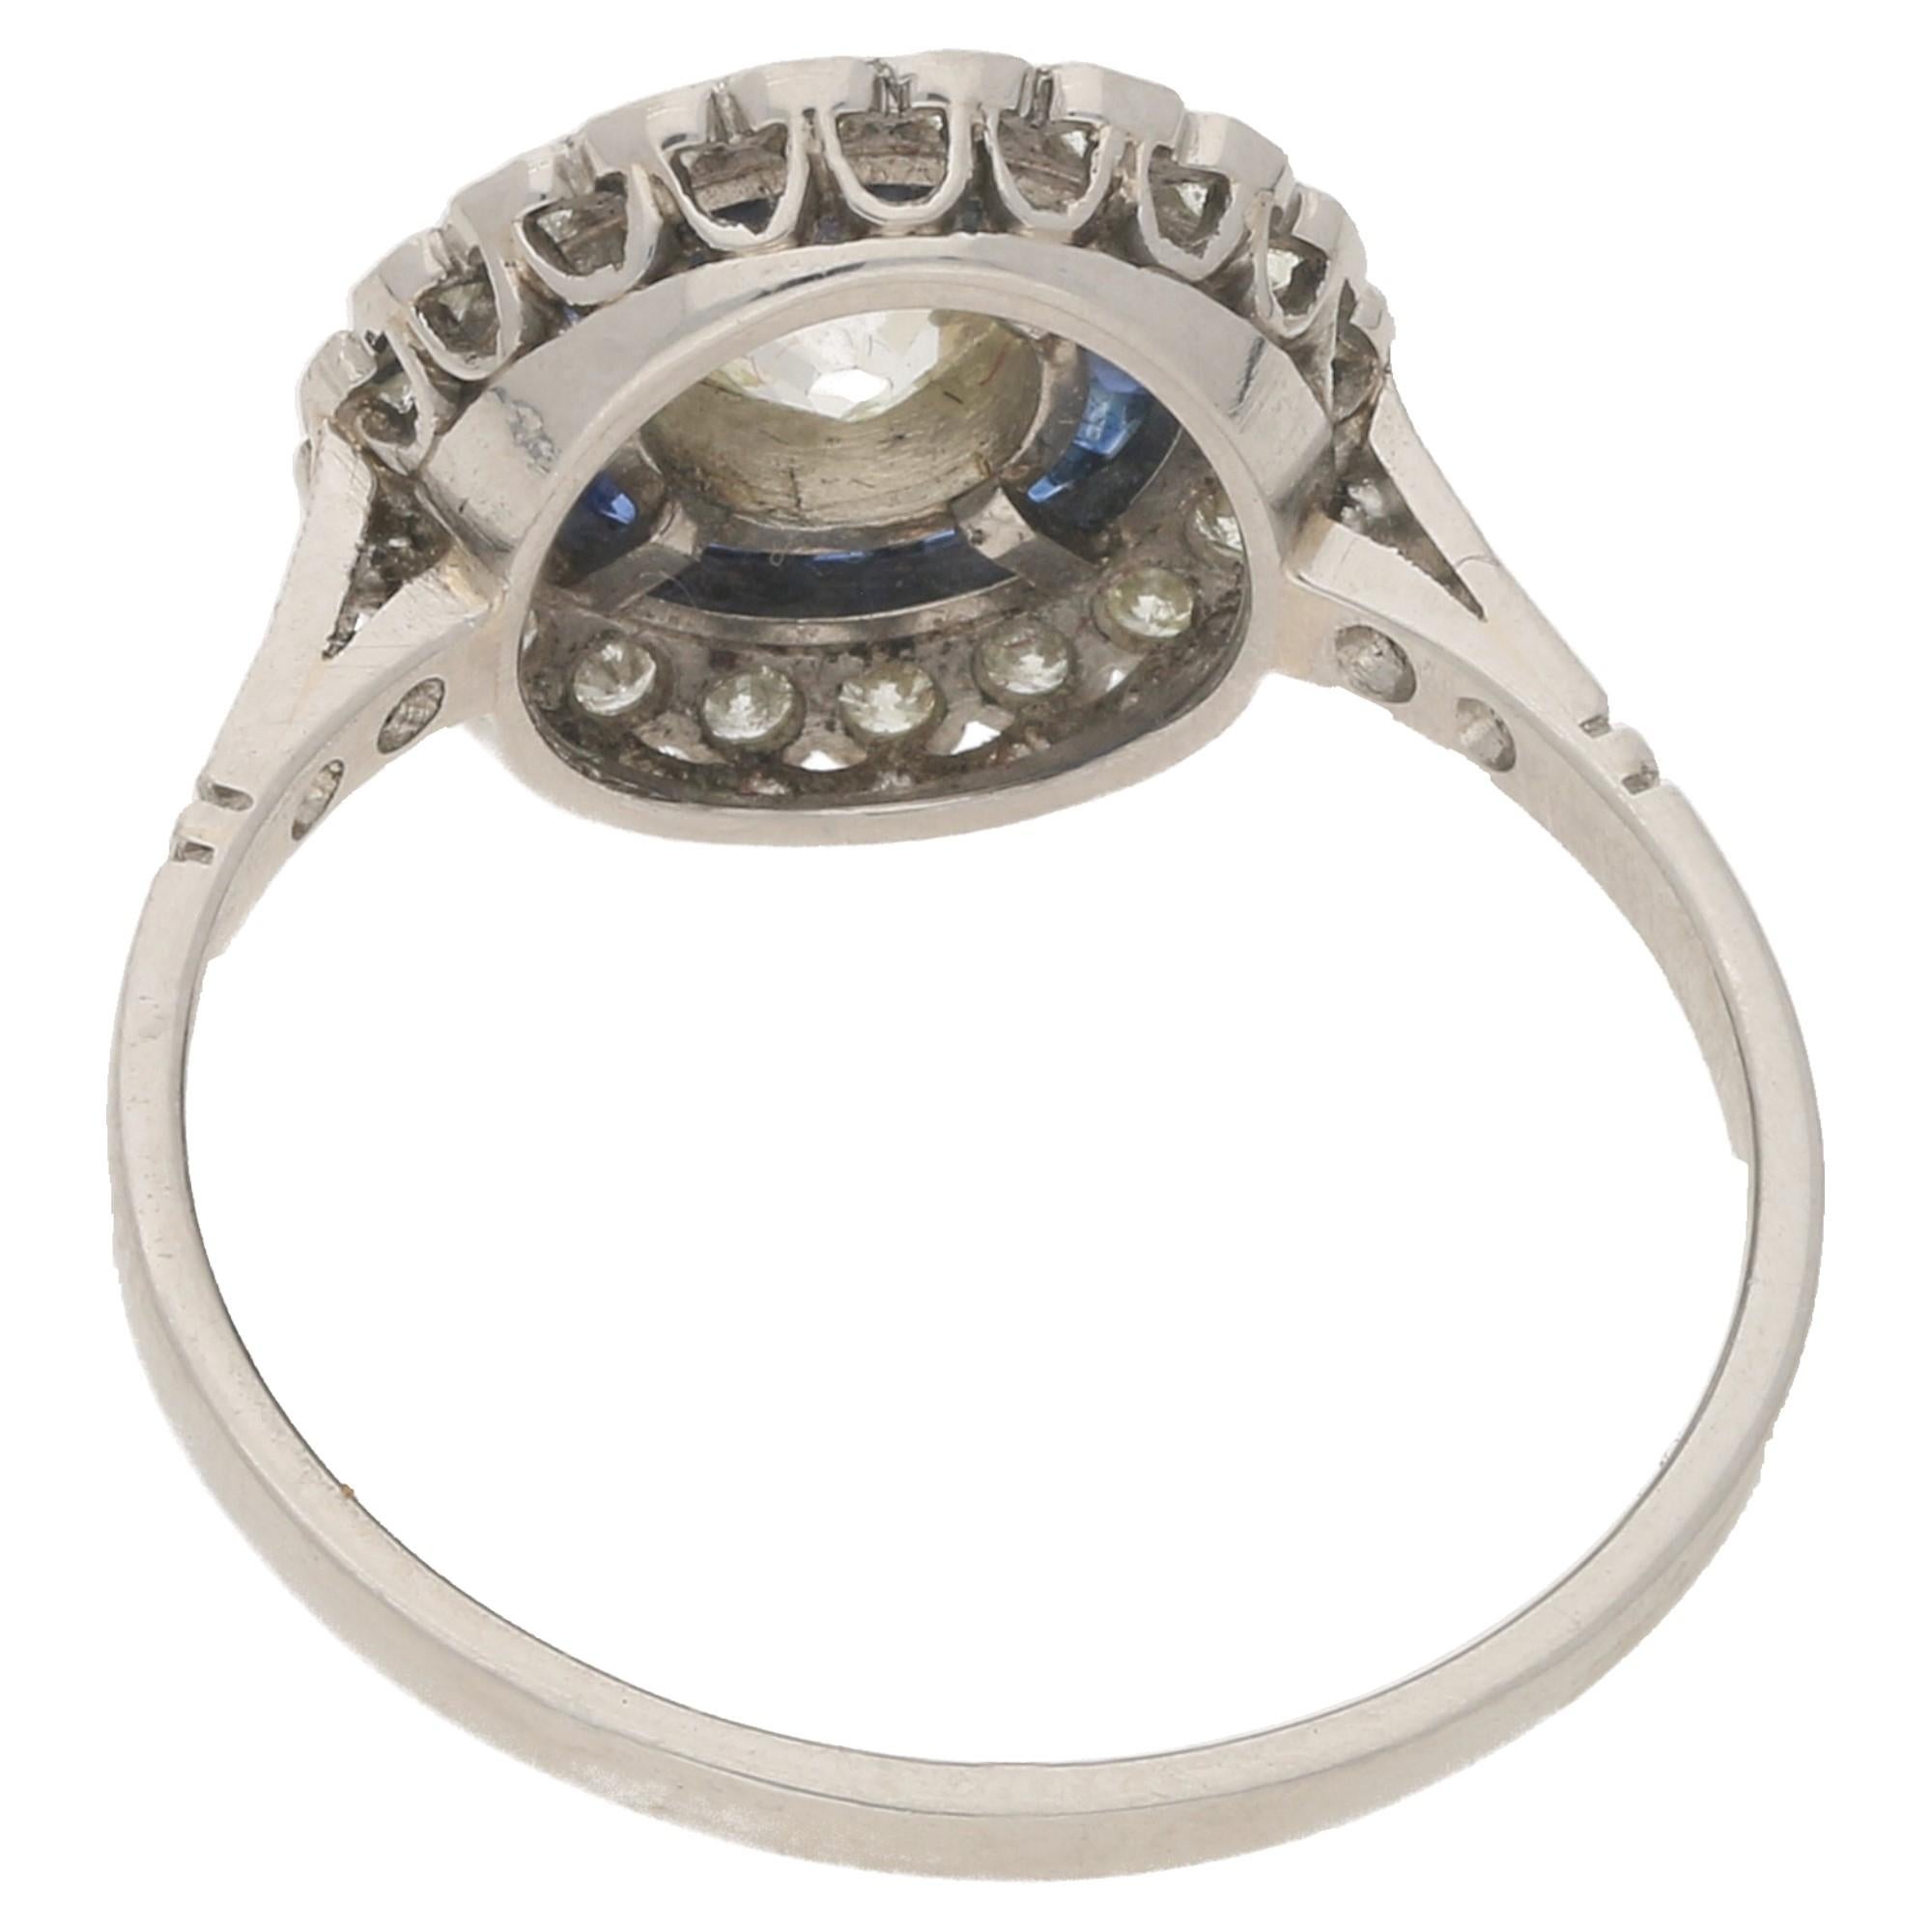 An Art Deco style diamond and sapphire coronet cluster target ring in platinum, featuring an Old Mine-cut diamond at the centre with approximately 0.60 carats, H/I colour (assessed) and SI clarity (assessed) bezel-set to the centre within a